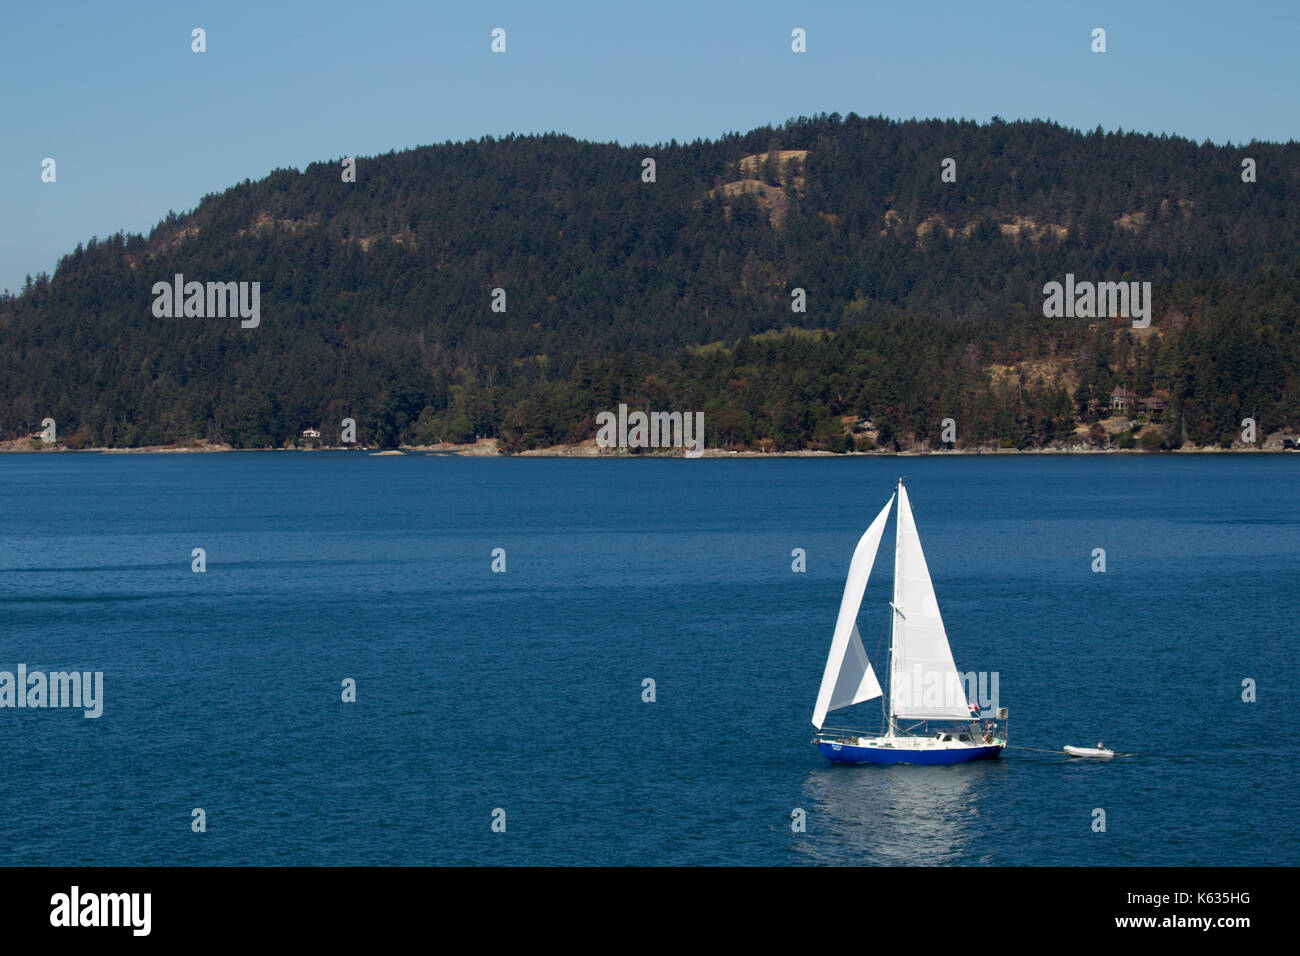 Sailing boat in the Salish Sea between the Gulf Islands at Vancouver Island, British Columbia, Canada. Stock Photo